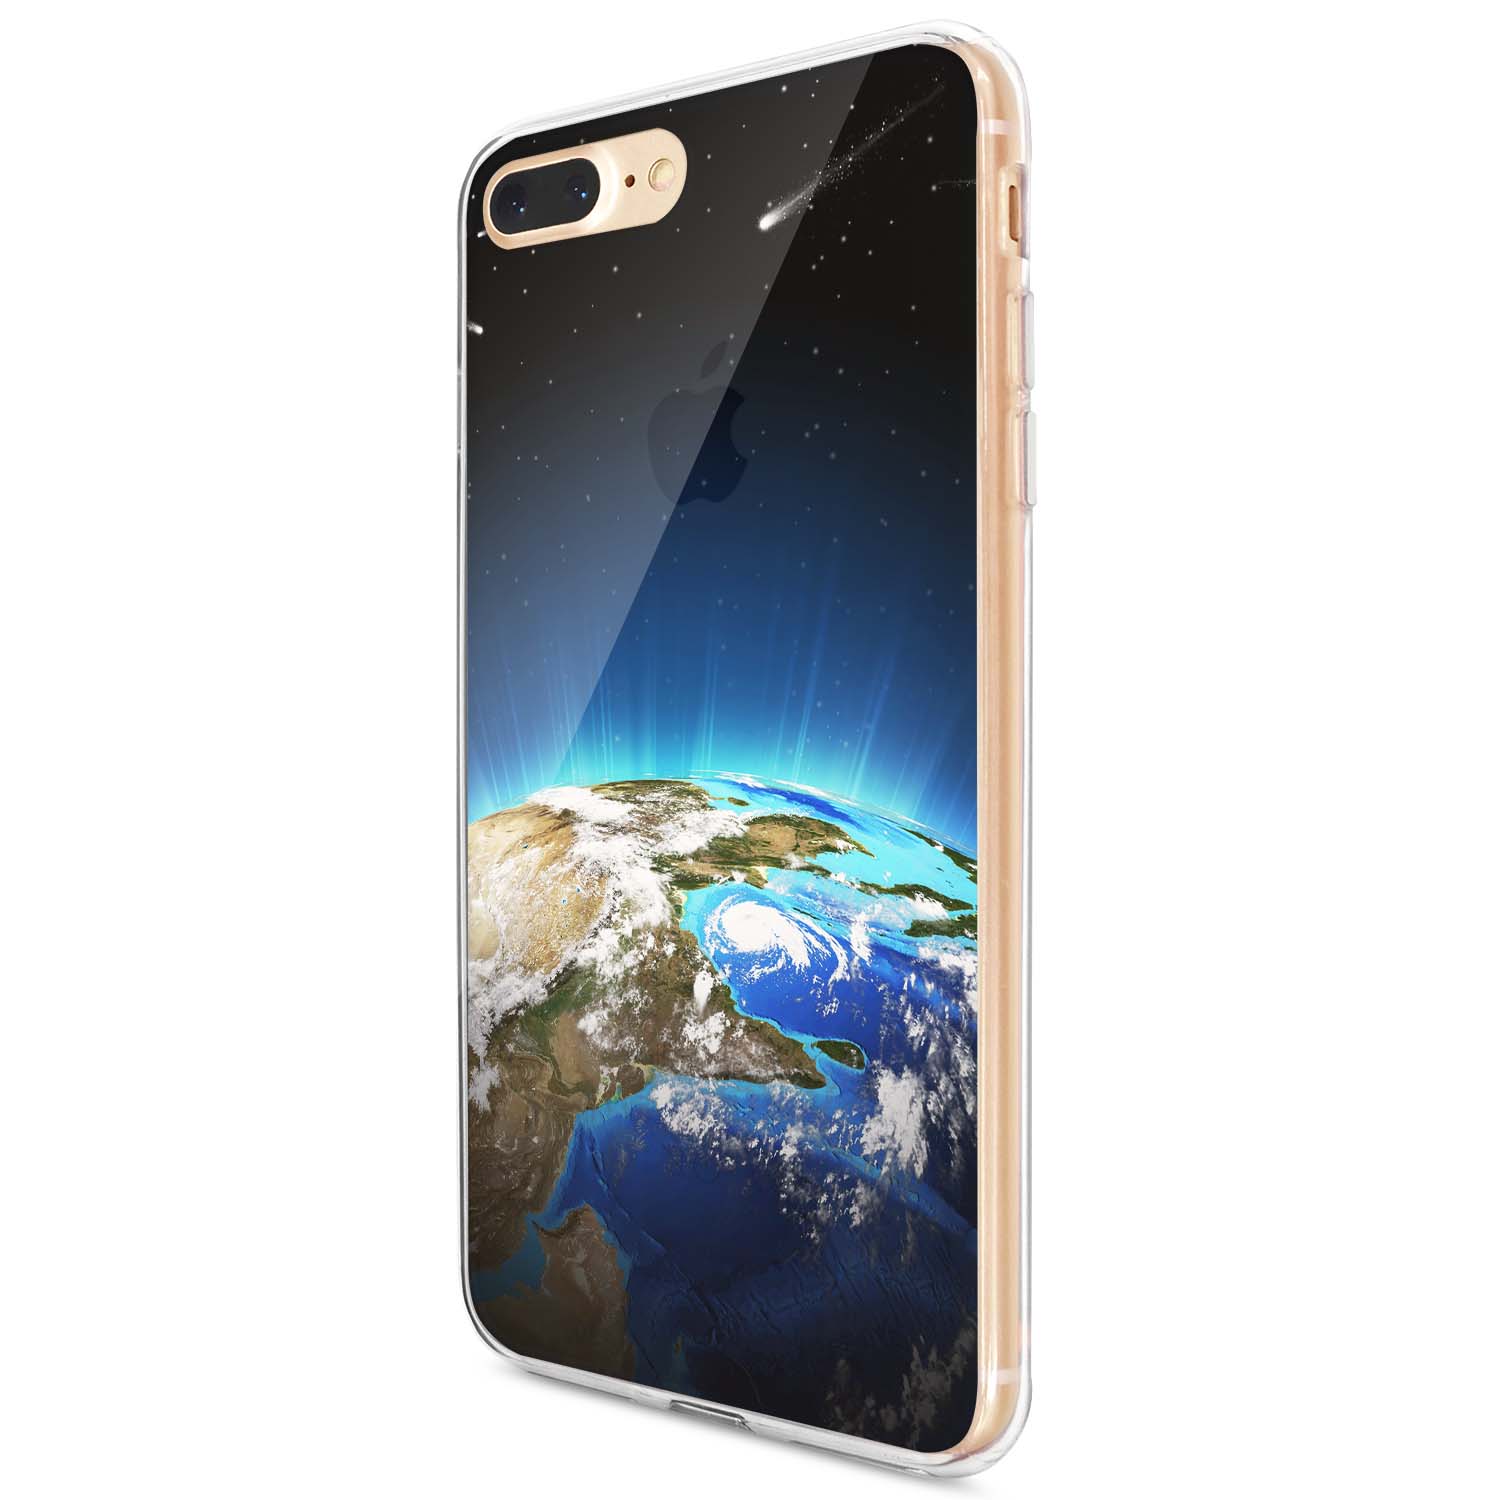 Azzumo Planets of the Solar System Soft Flexible Ultra Thin Case Cover For the Apple iPod Touch 6th & 7th Gen 